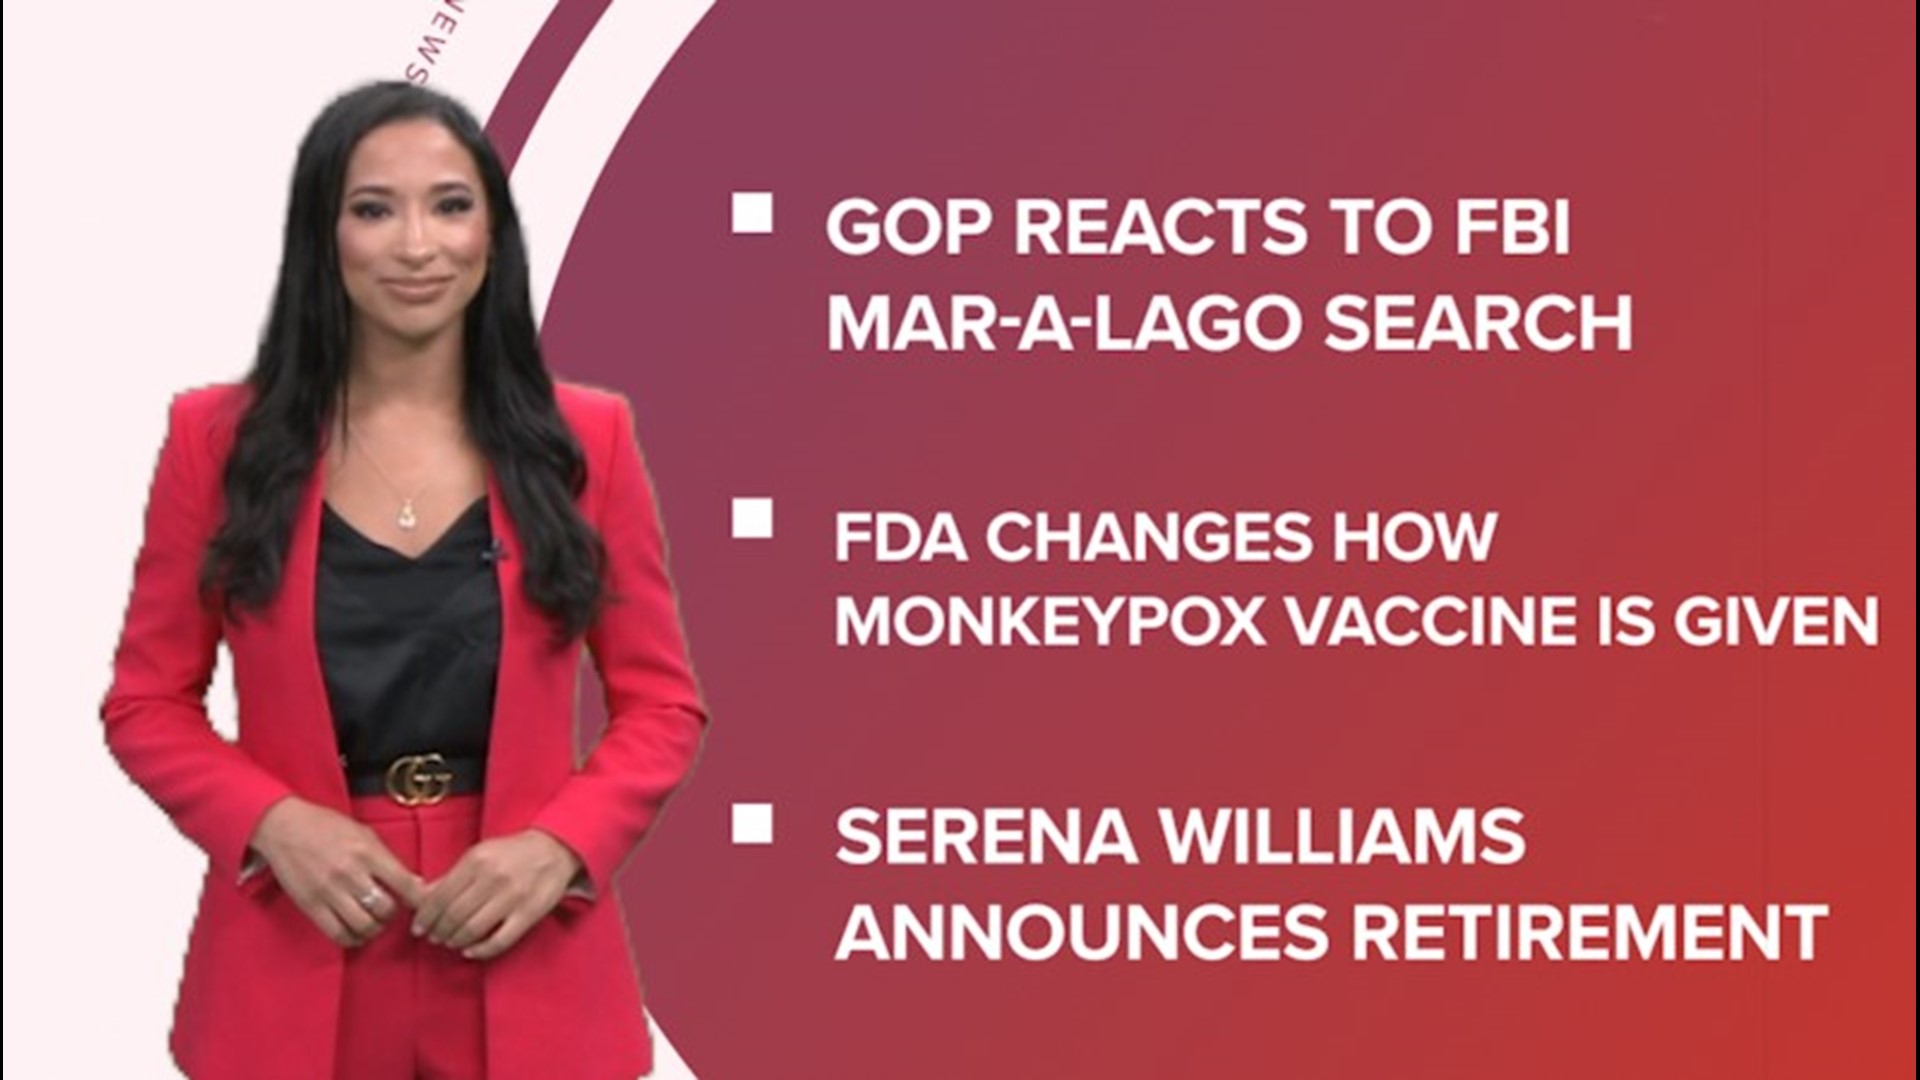 A look at what is happening in the news from the FDA changing monkeypox vaccine guidance to 4,000 beagles in need of homes and Serena Williams announces retirement.